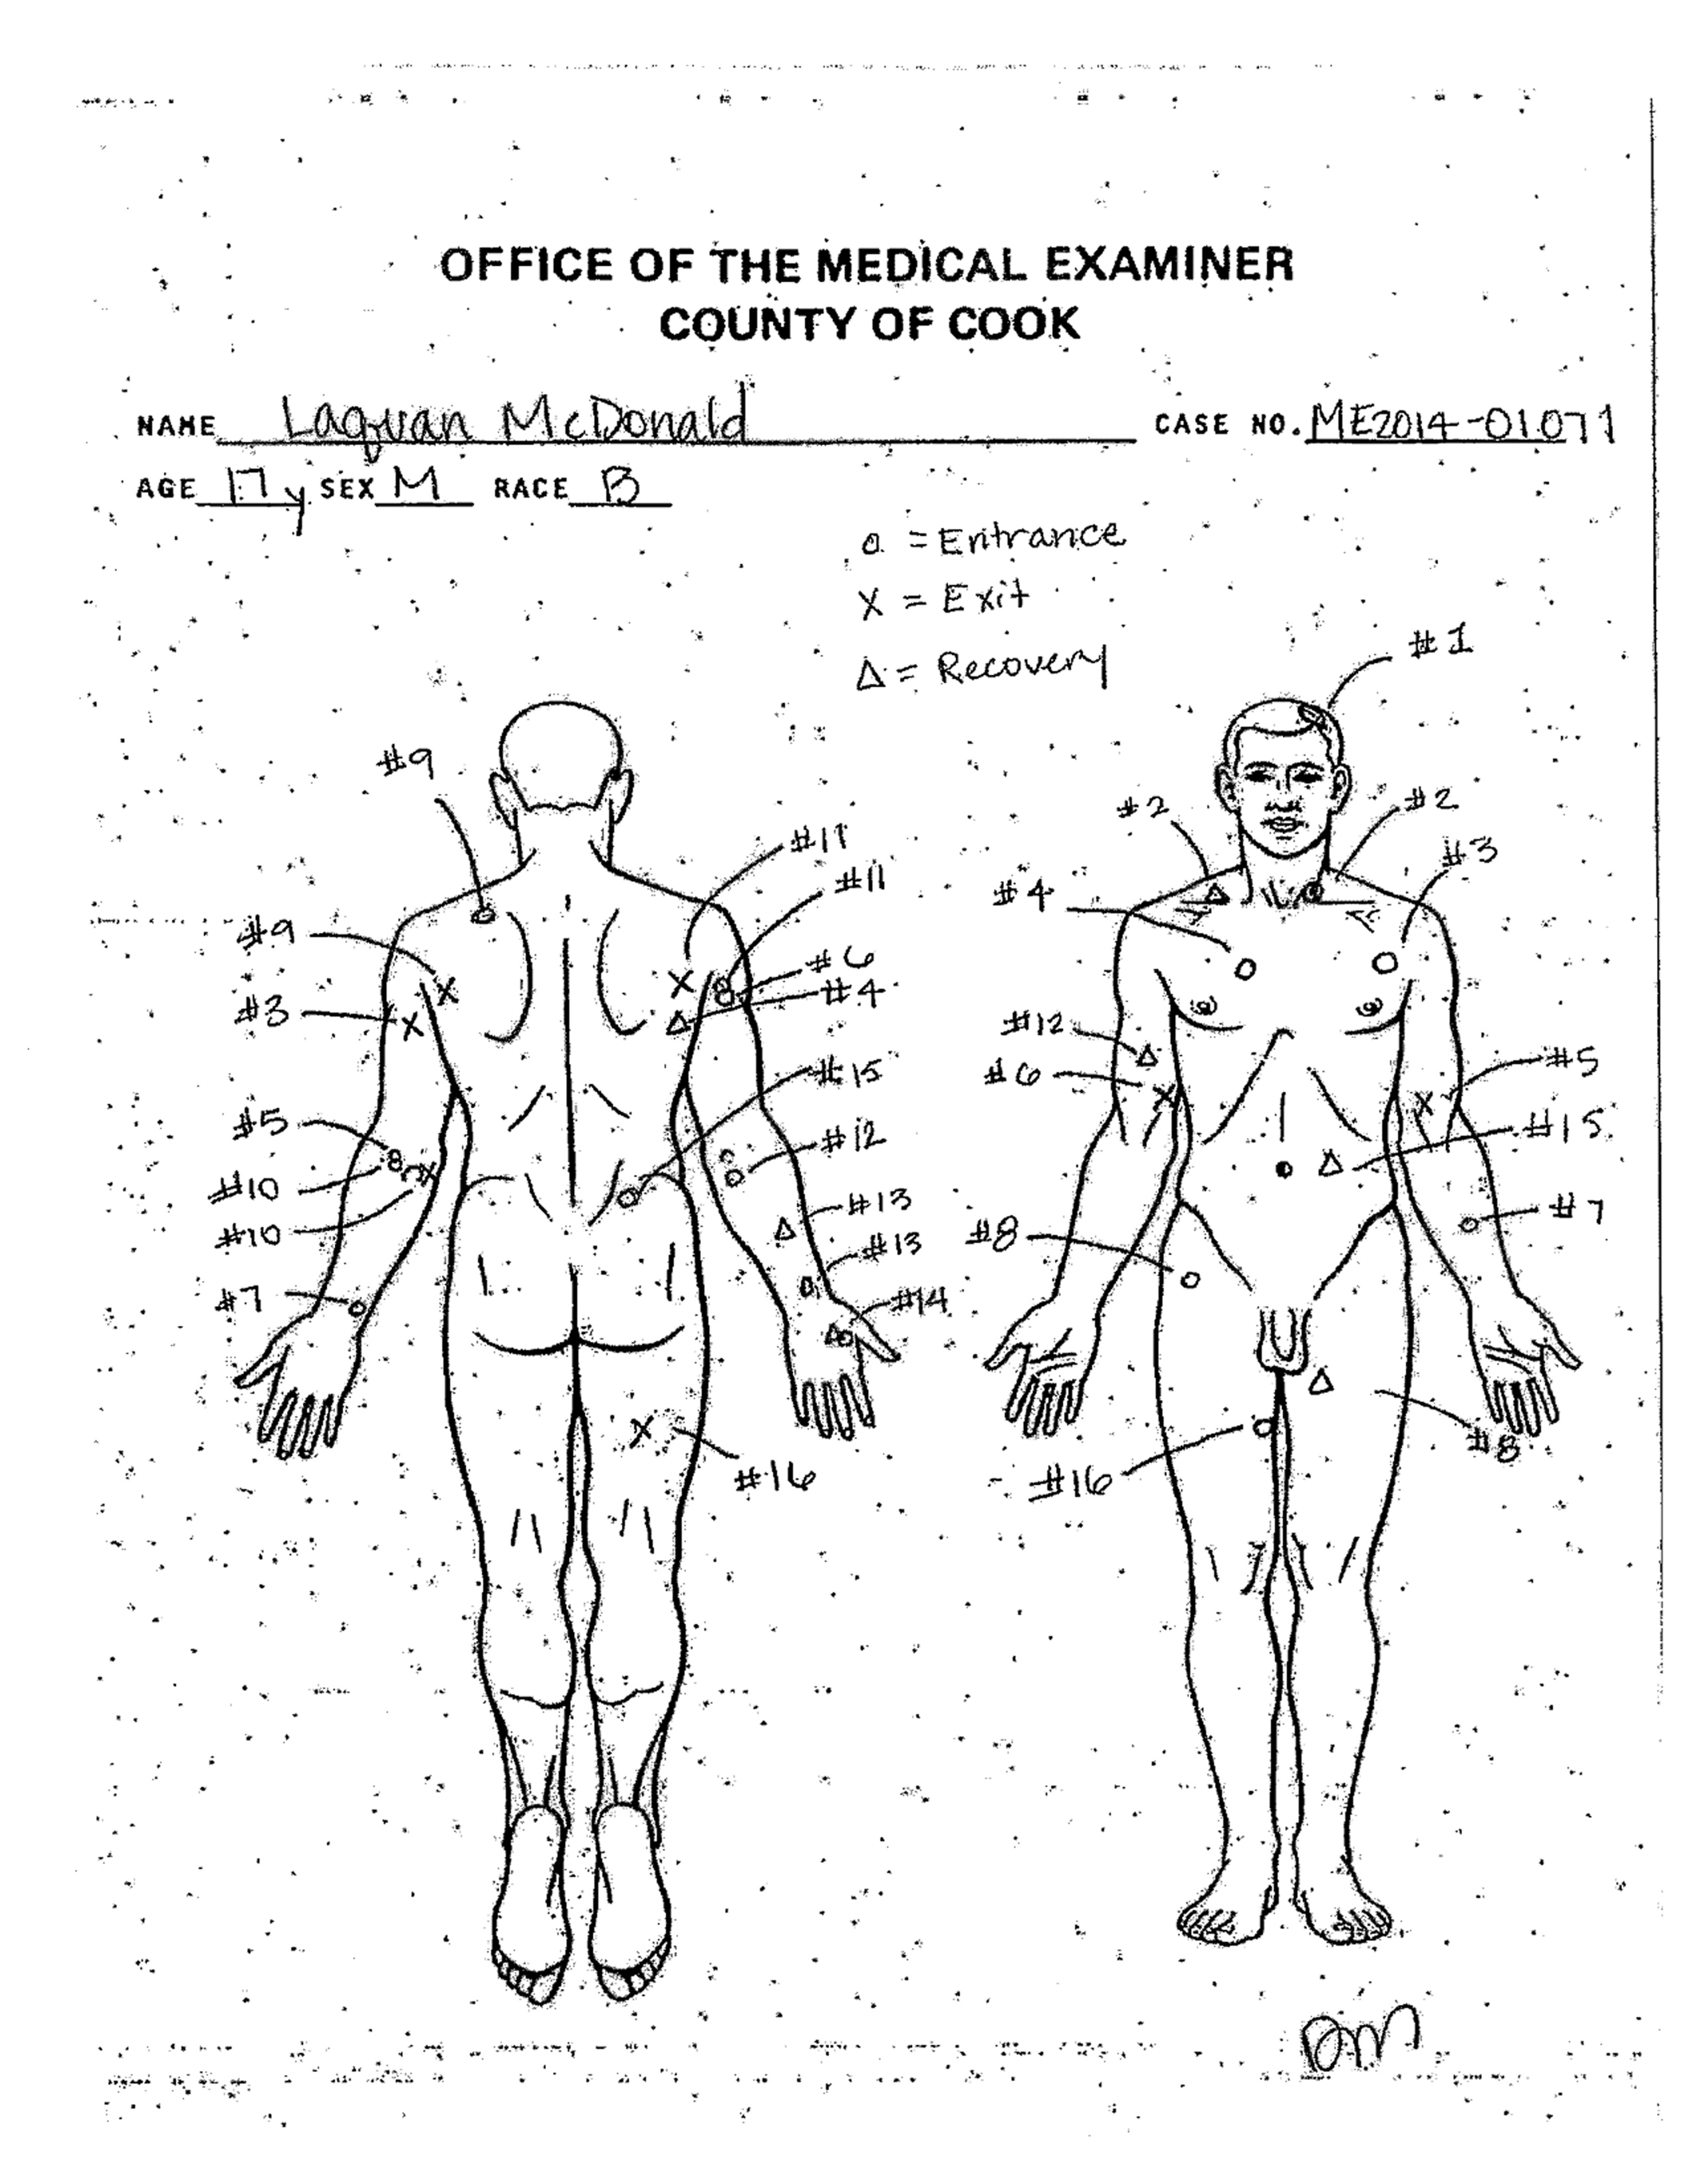 Autopsy diagram showing the location of wounds on the body Laquan McDonald, shot by a Chicago Police officer 16 times on Oct. 20, 2014. (Cook County Medical Examiner's office/AP)